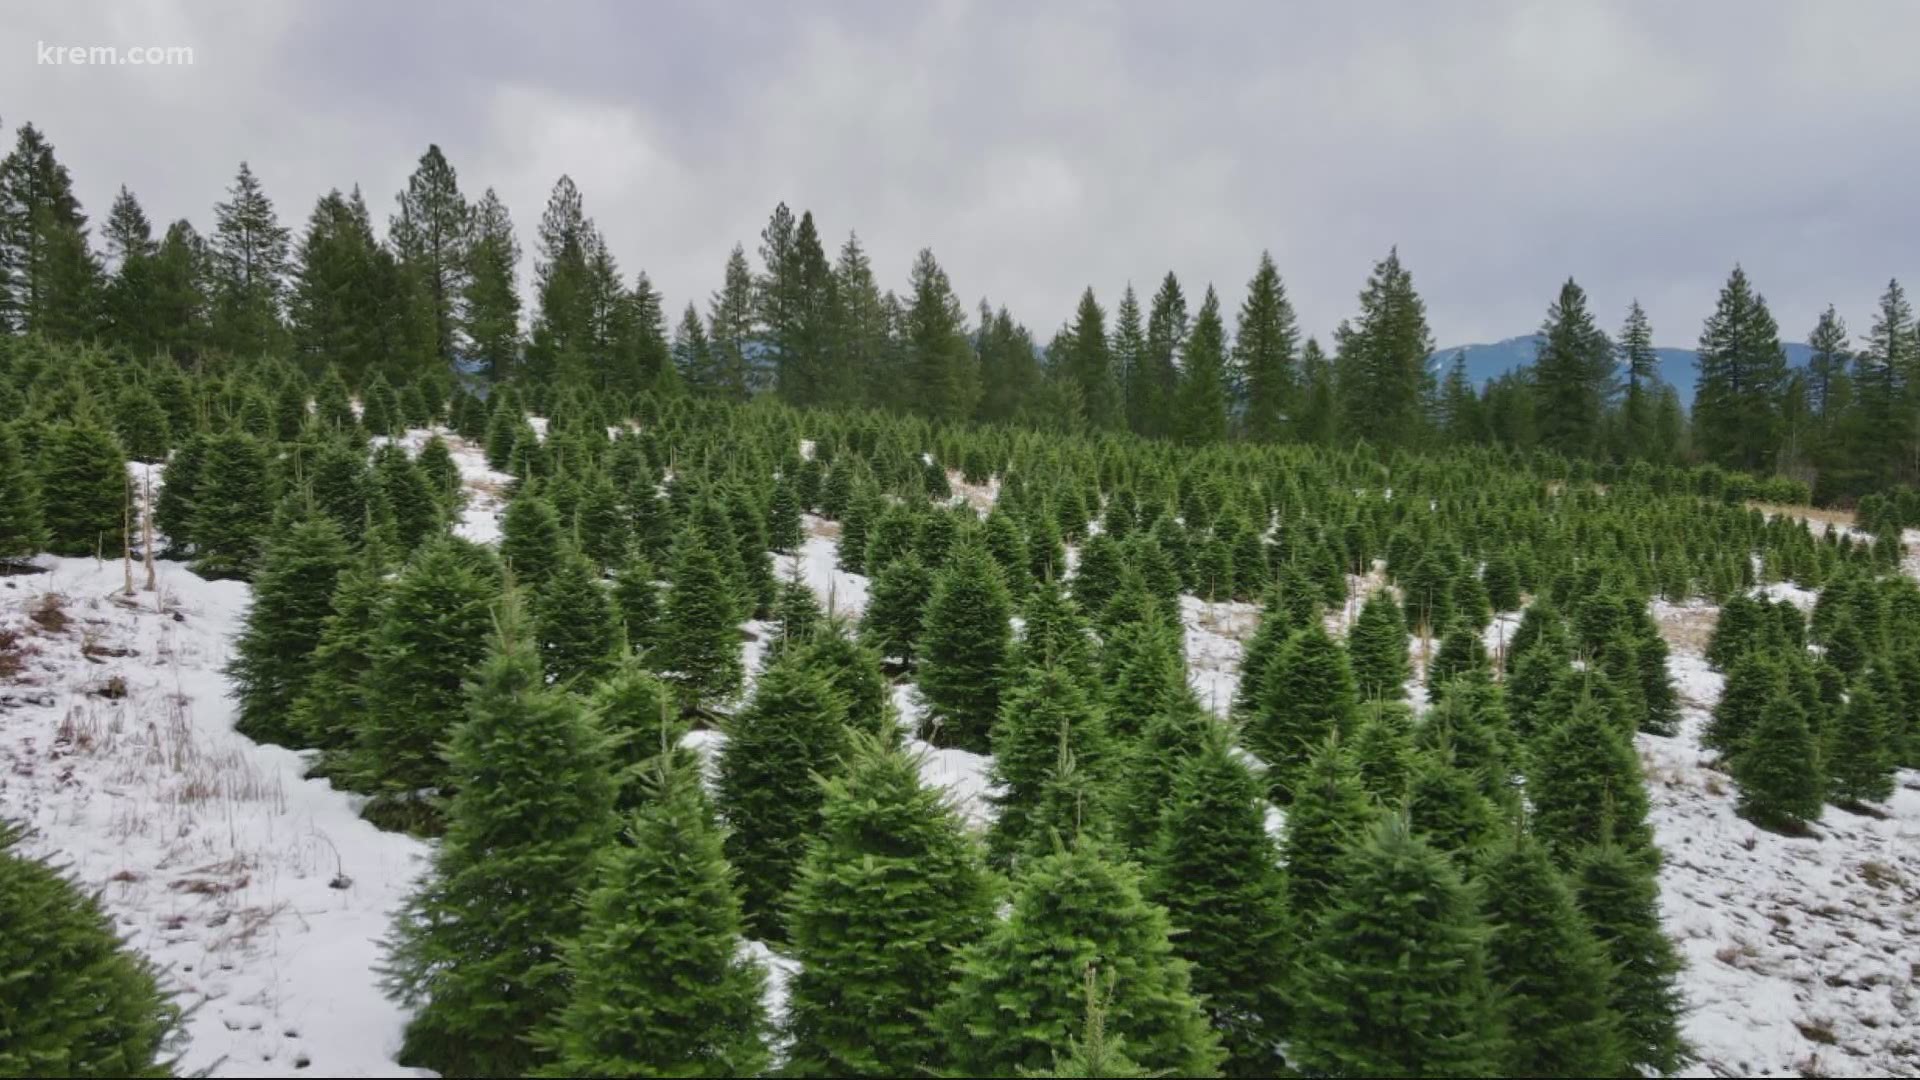 While most local Christmas tree farms are struggling to keep up with demand this year, the owners of Camden Ranch say they have plenty for customers.